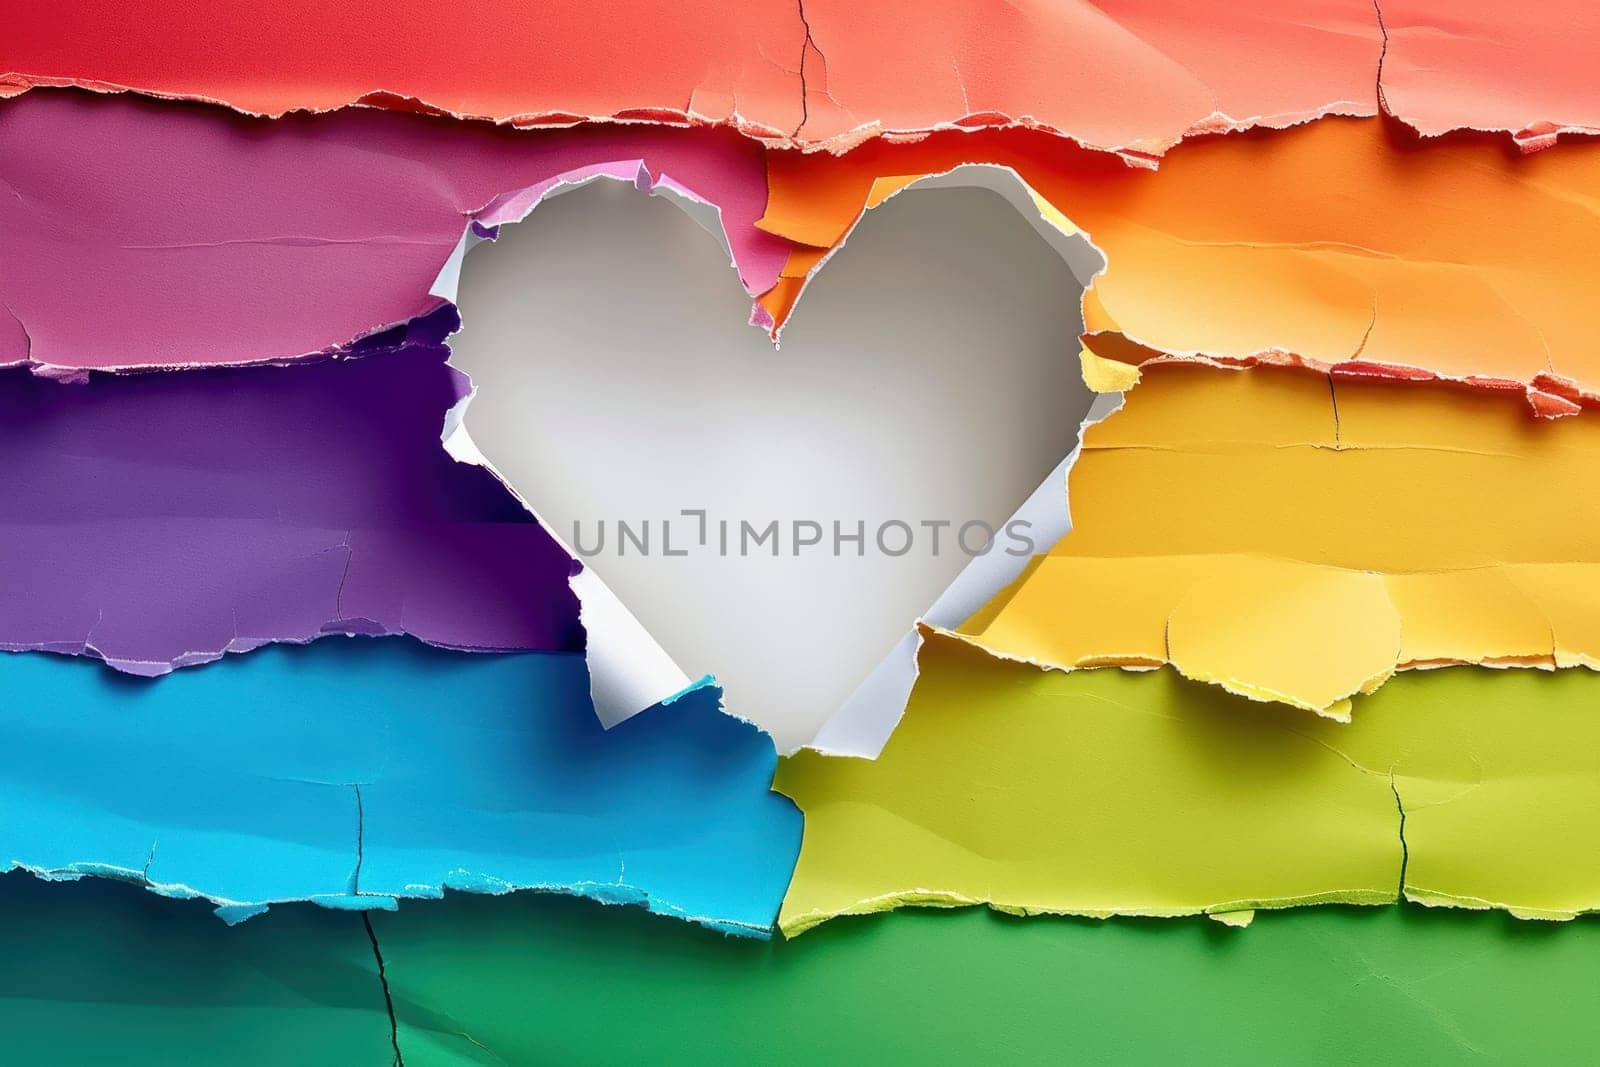 A colorful piece of paper with a heart cut out of it. The heart is surrounded by a rainbow of colors, and the paper appears to be torn or ripped. Concept of freedom and individuality